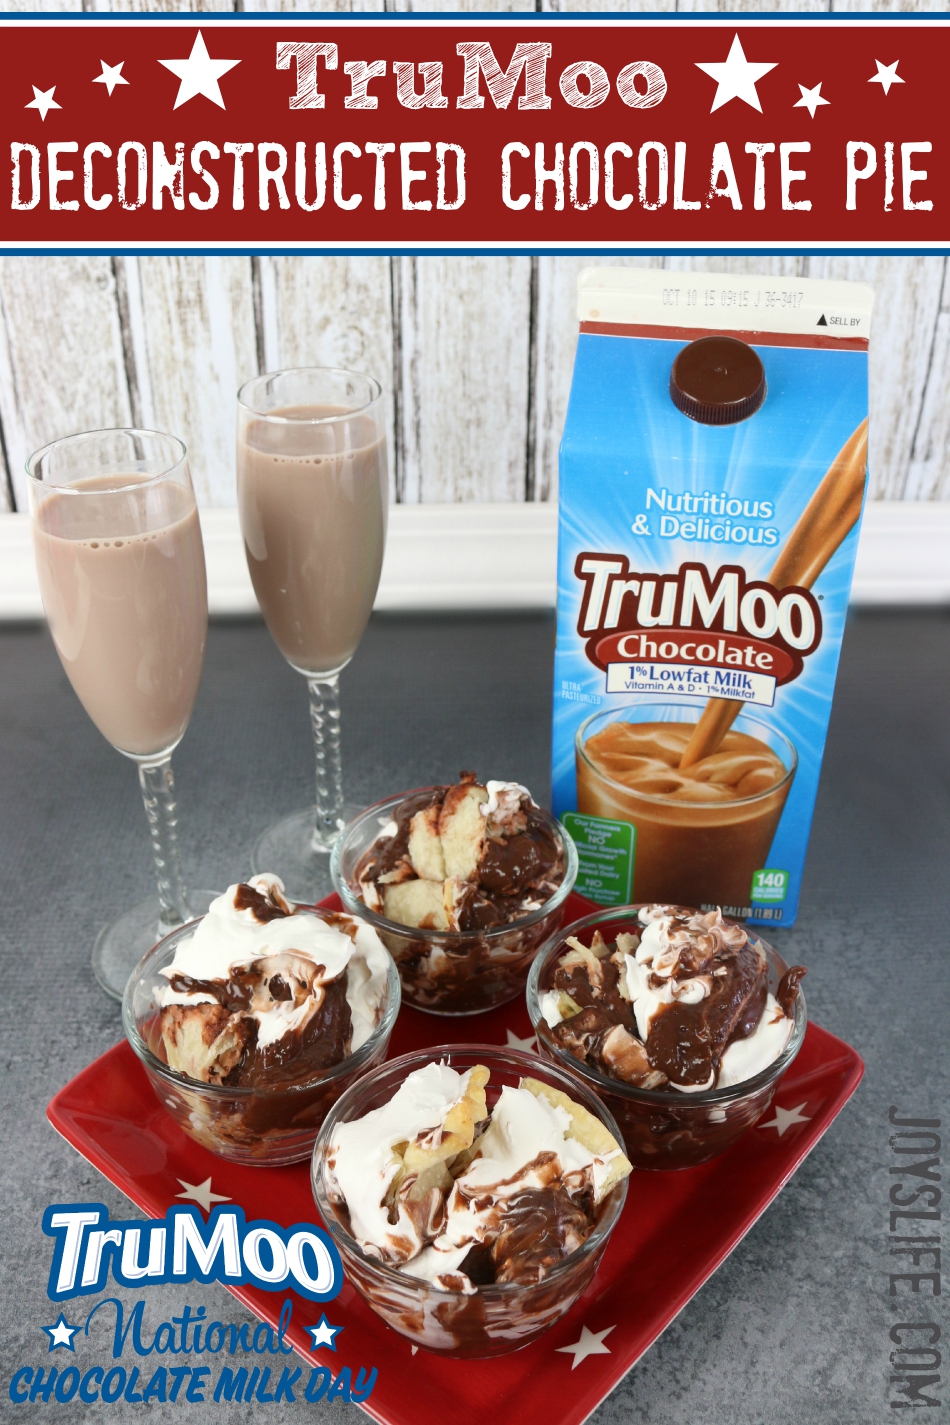 Make a Deconstructed Chocolate Pie for National Chocolate Milk Day #NationalChocolateMilkDay or any day!